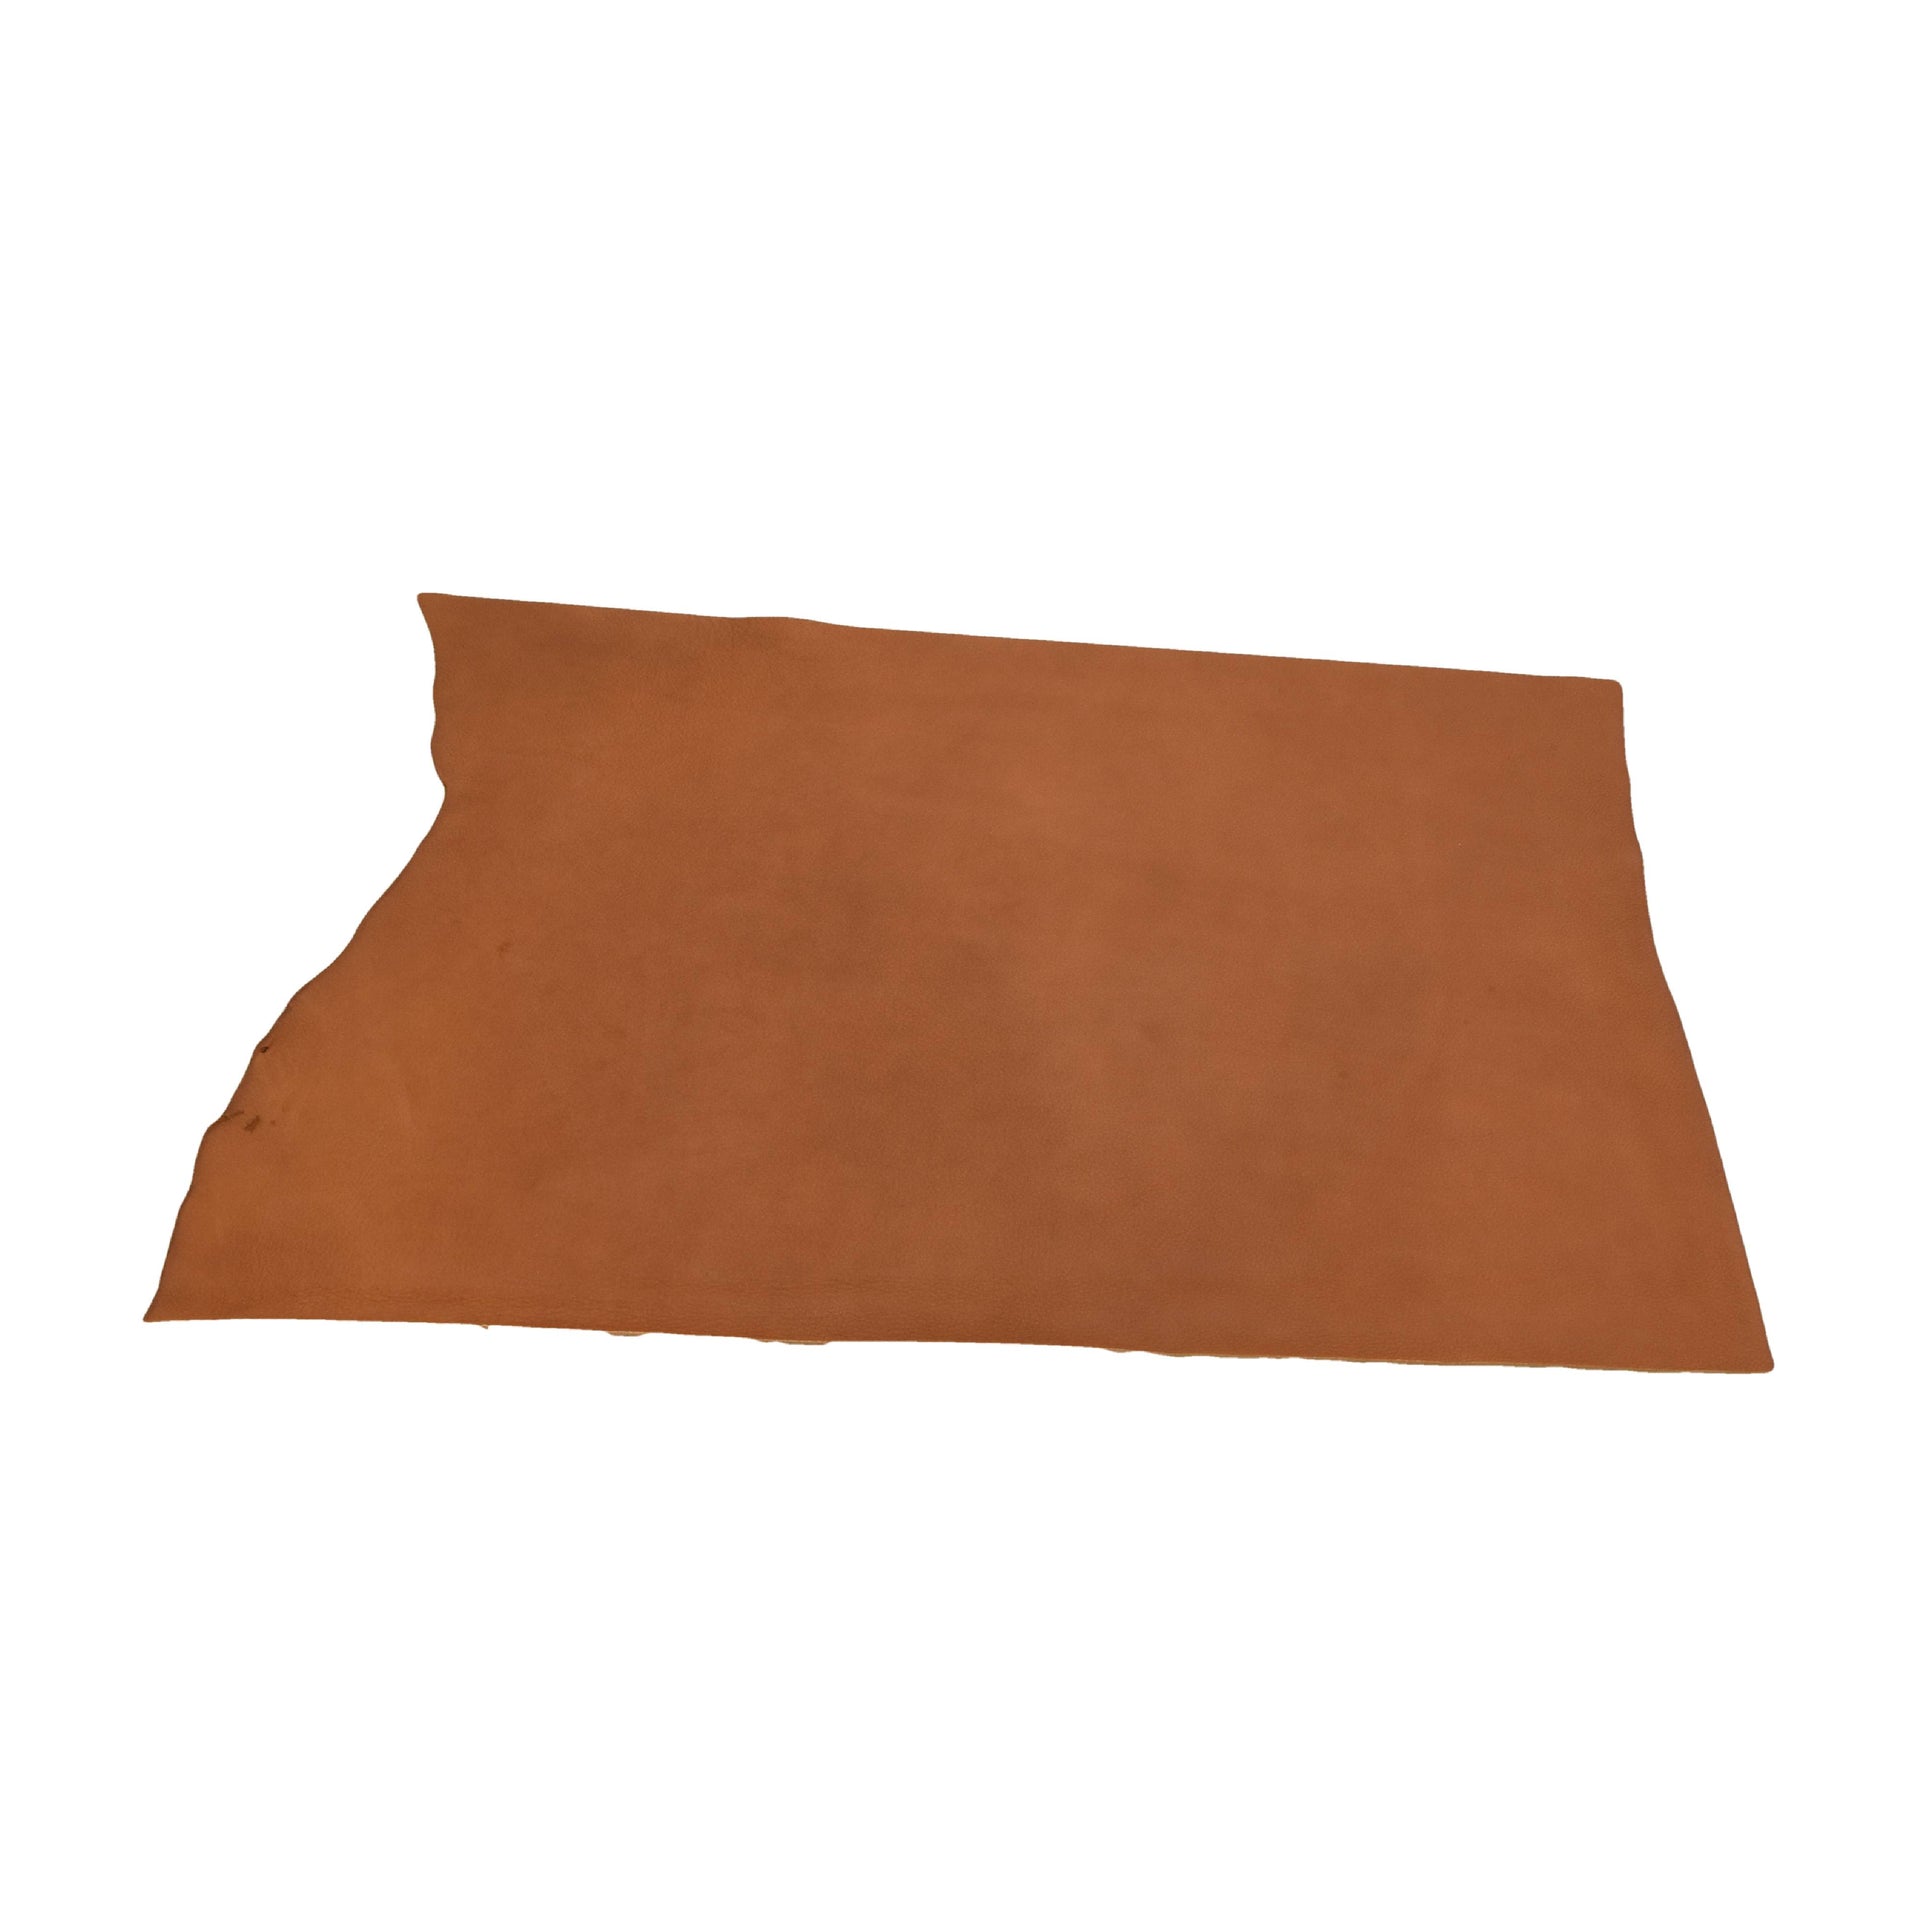 Base Camp Burnt Orange, Oil Tanned Summits Edge Sides & Pieces, Middle Piece / 6.5-7.5 Square Foot | The Leather Guy